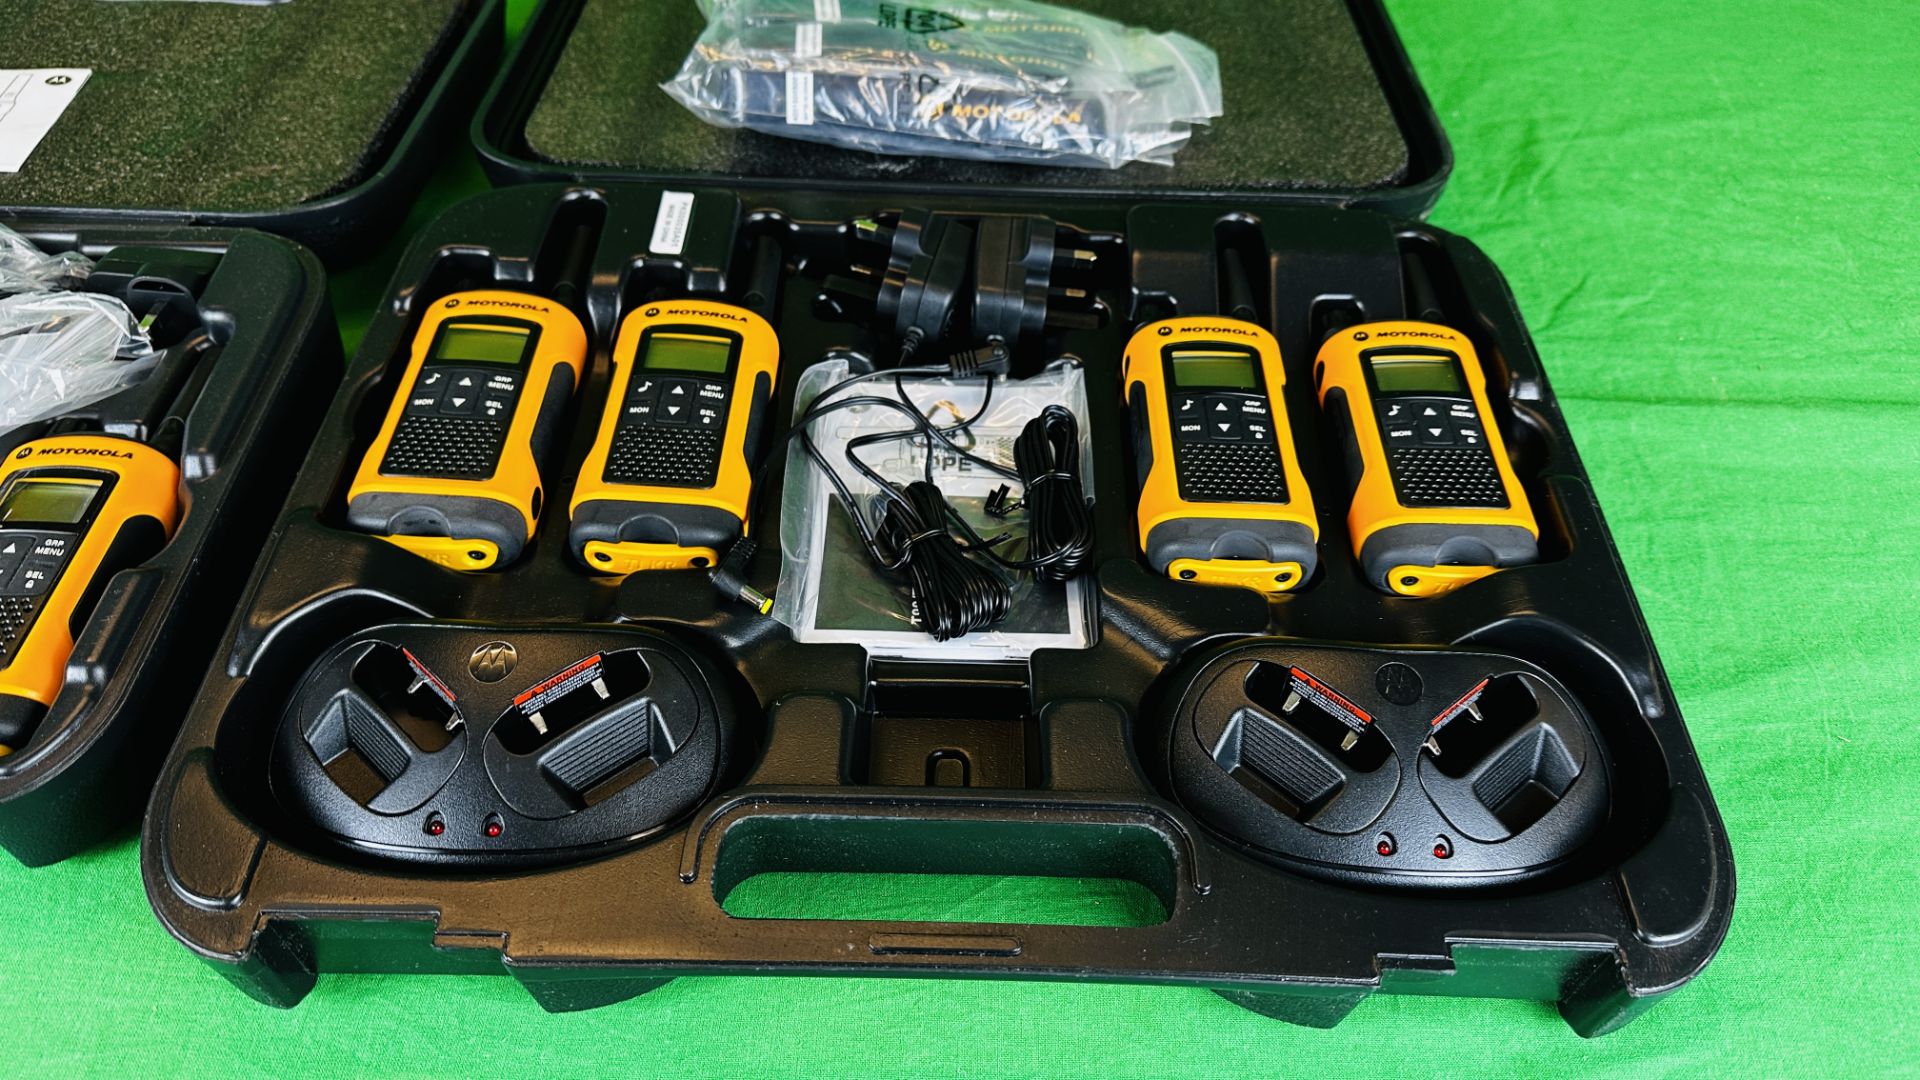 6 X MOTOROLA WALKIE TALKIE RADIO'S CASED WITH CHARGERS AND ACCESSORIES (2 CASES). - Image 3 of 11